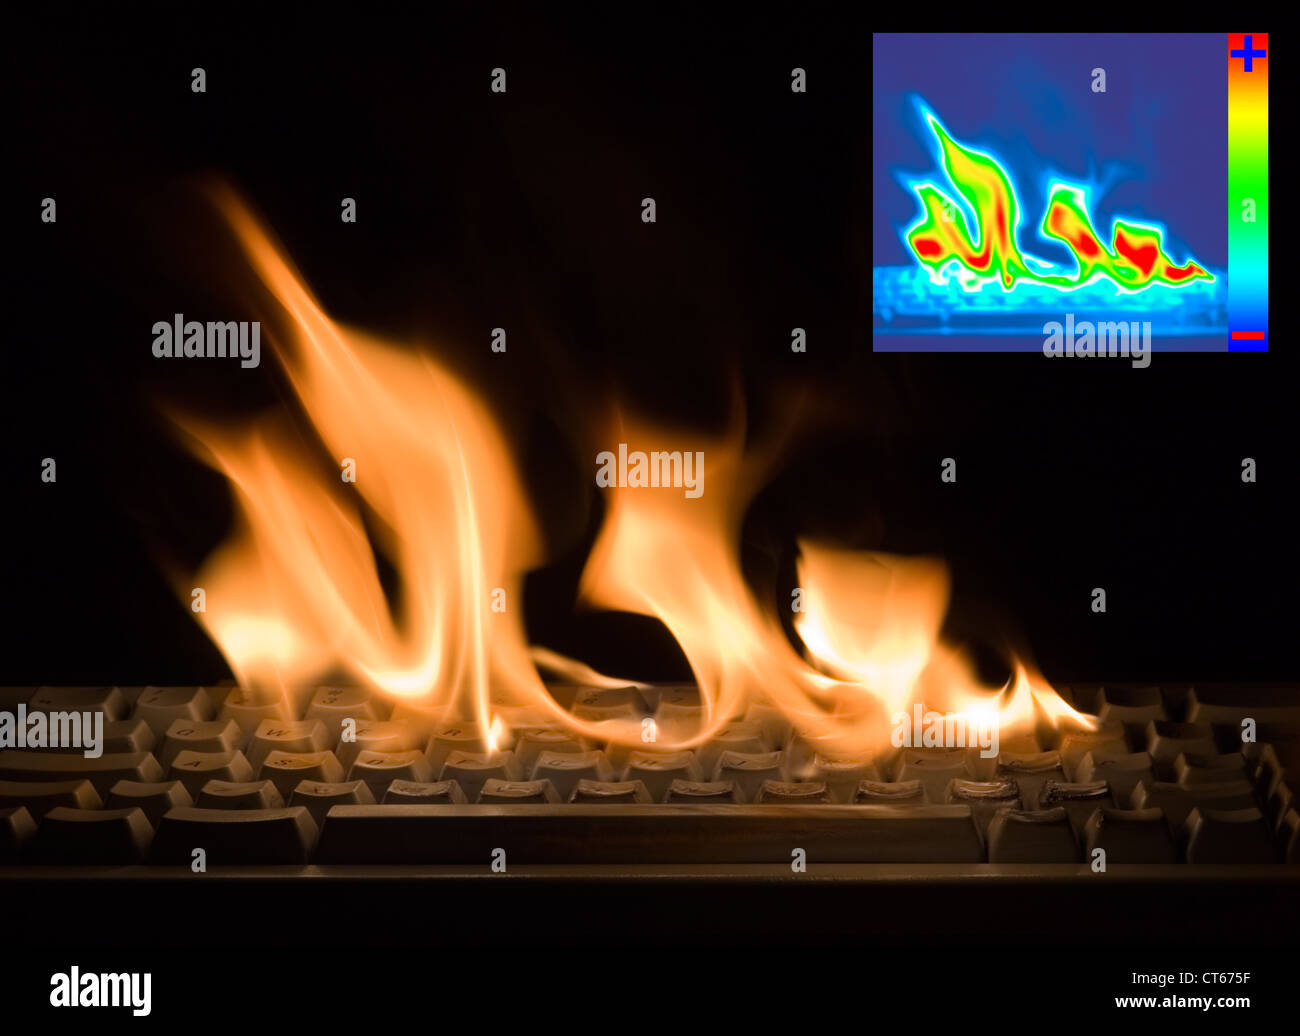 Burning Keyboard with Thermal Image Diagram for Damage Detection Stock Photo